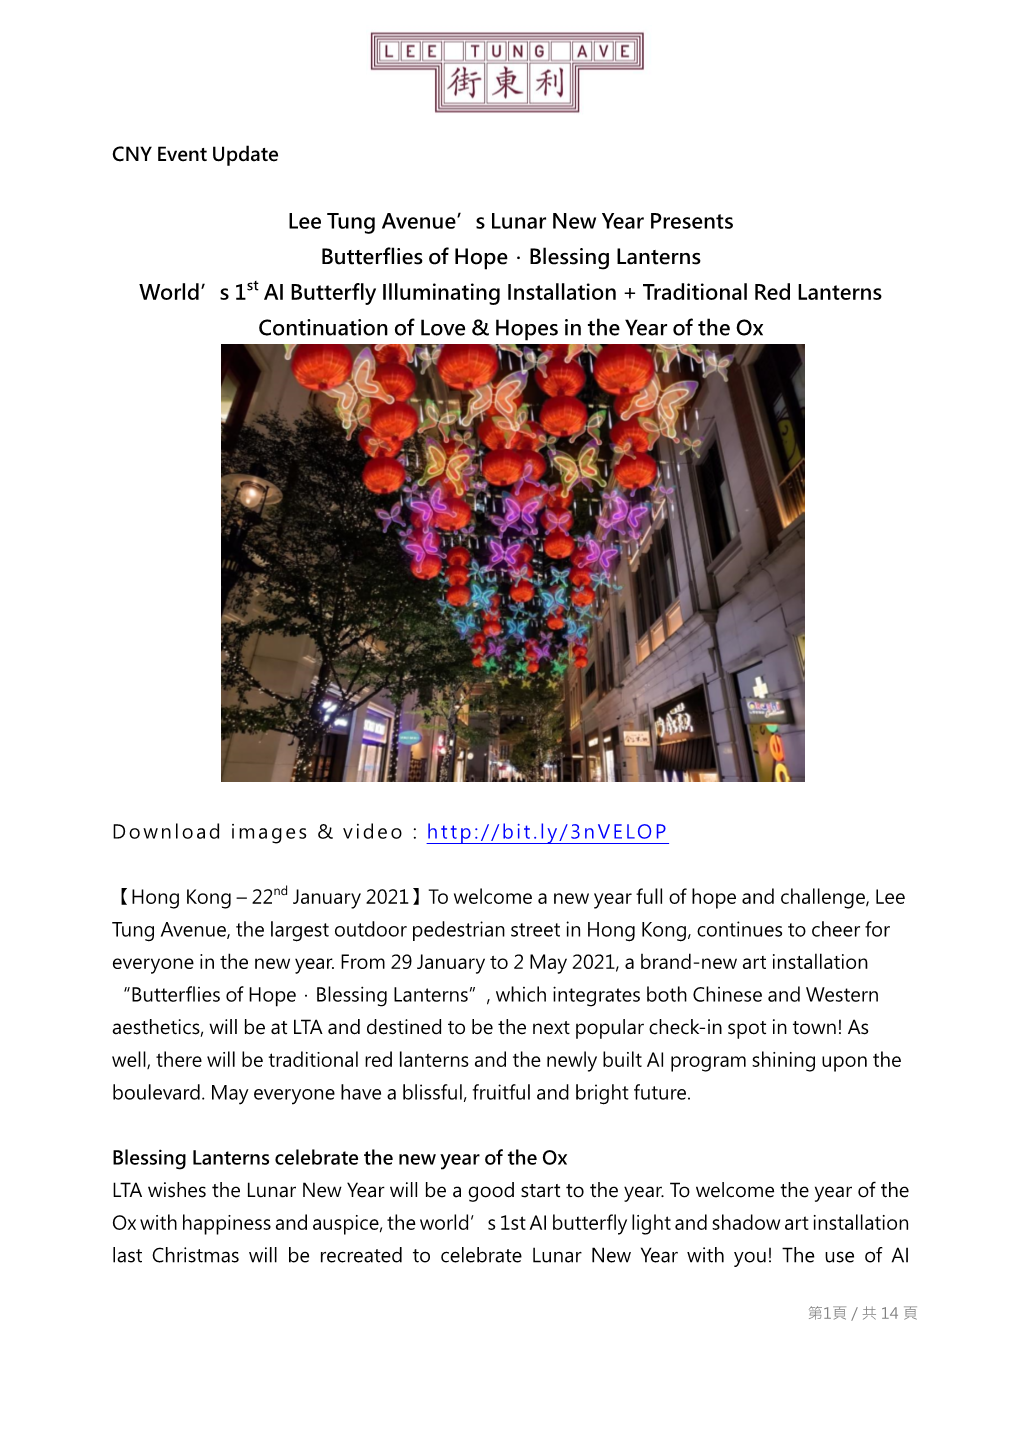 Lee Tung Avenue's Lunar New Year Presents Butterflies of Hope